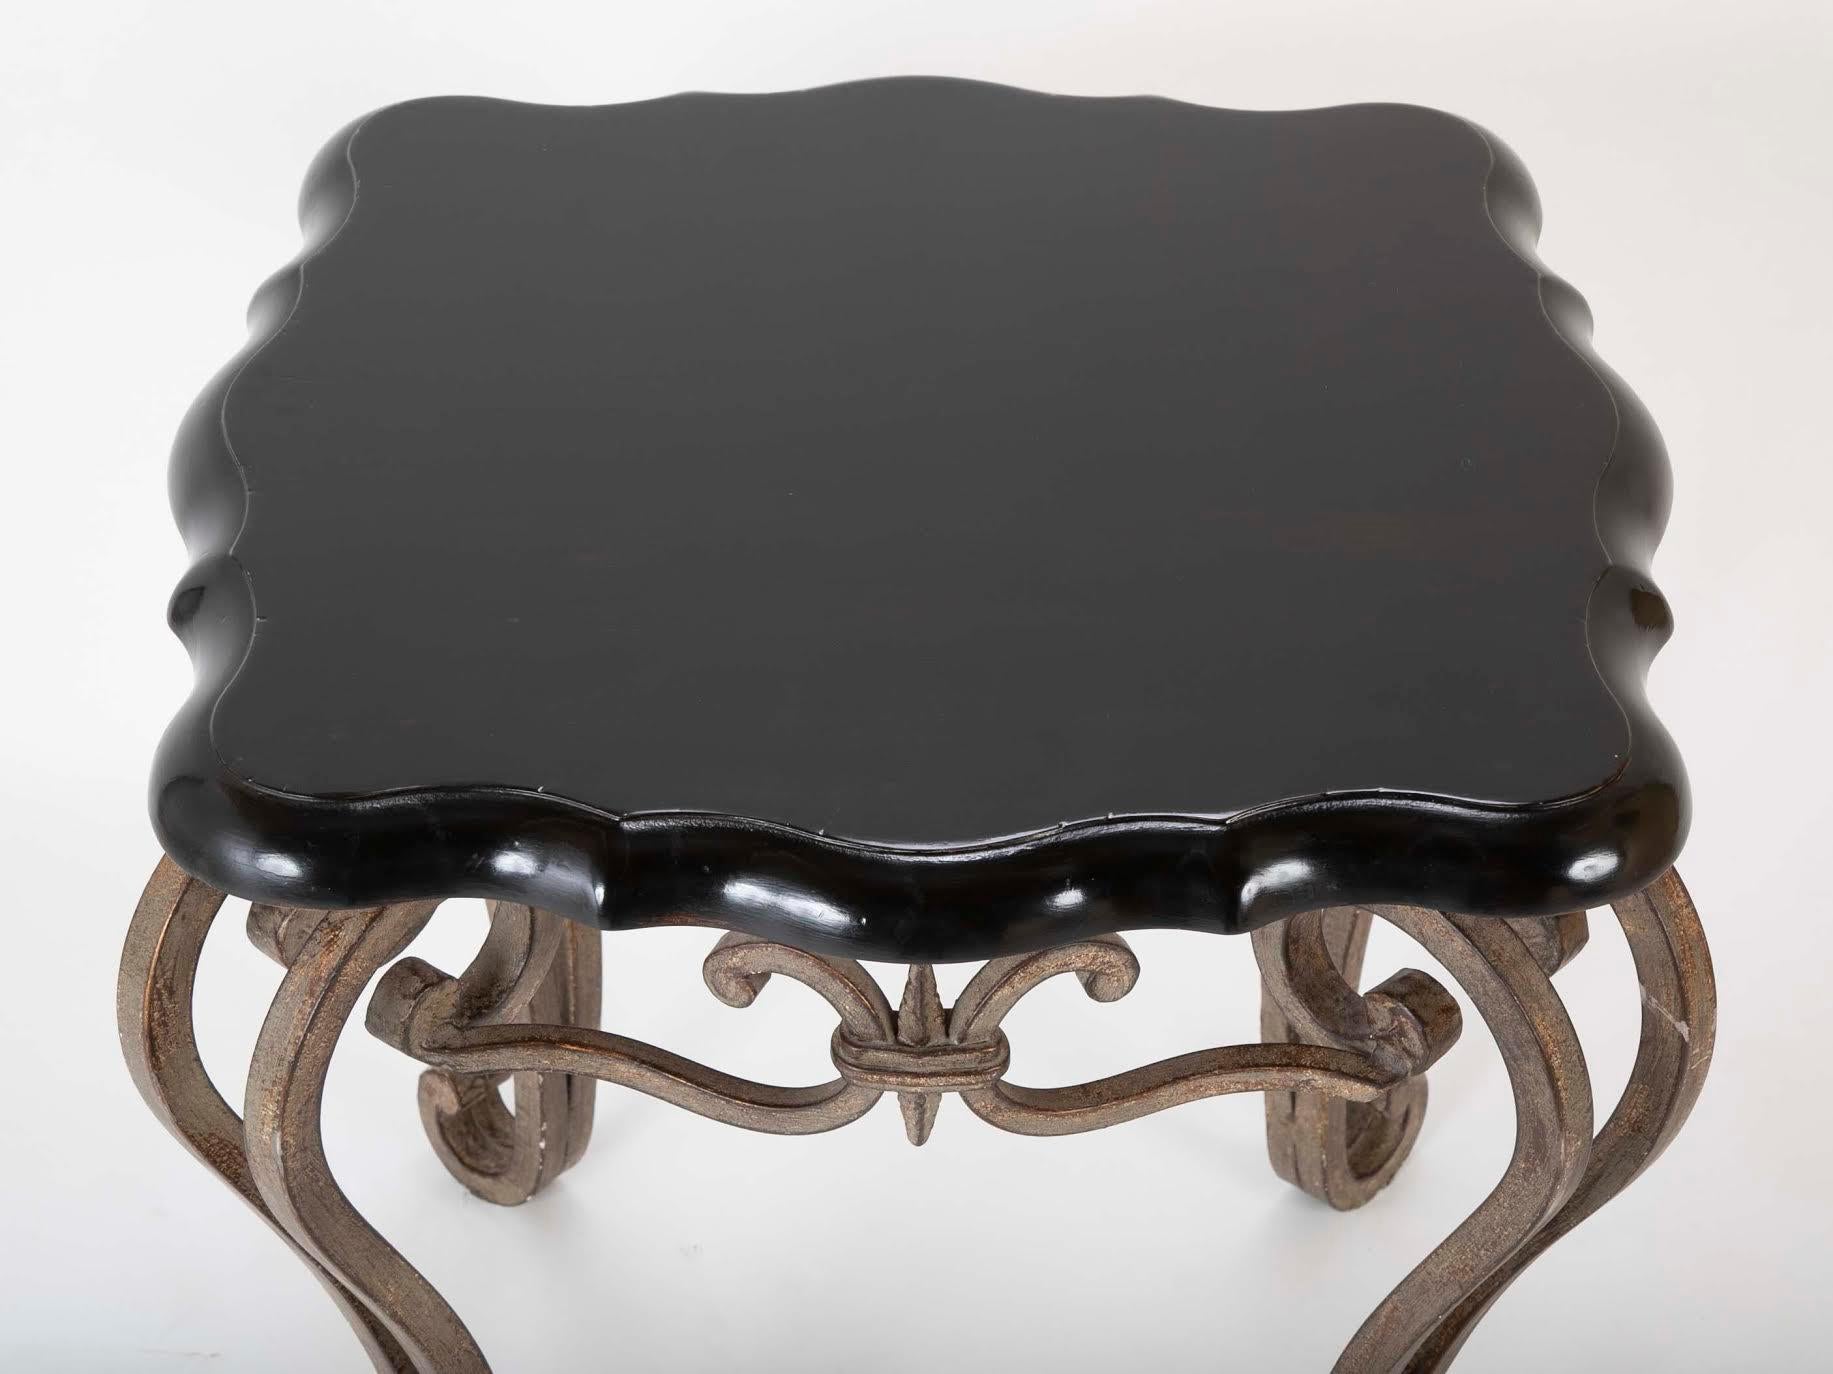 Pair of French Midcentury Wrought Iron Side Tables with Black Lacquered Tops In Good Condition For Sale In Stamford, CT